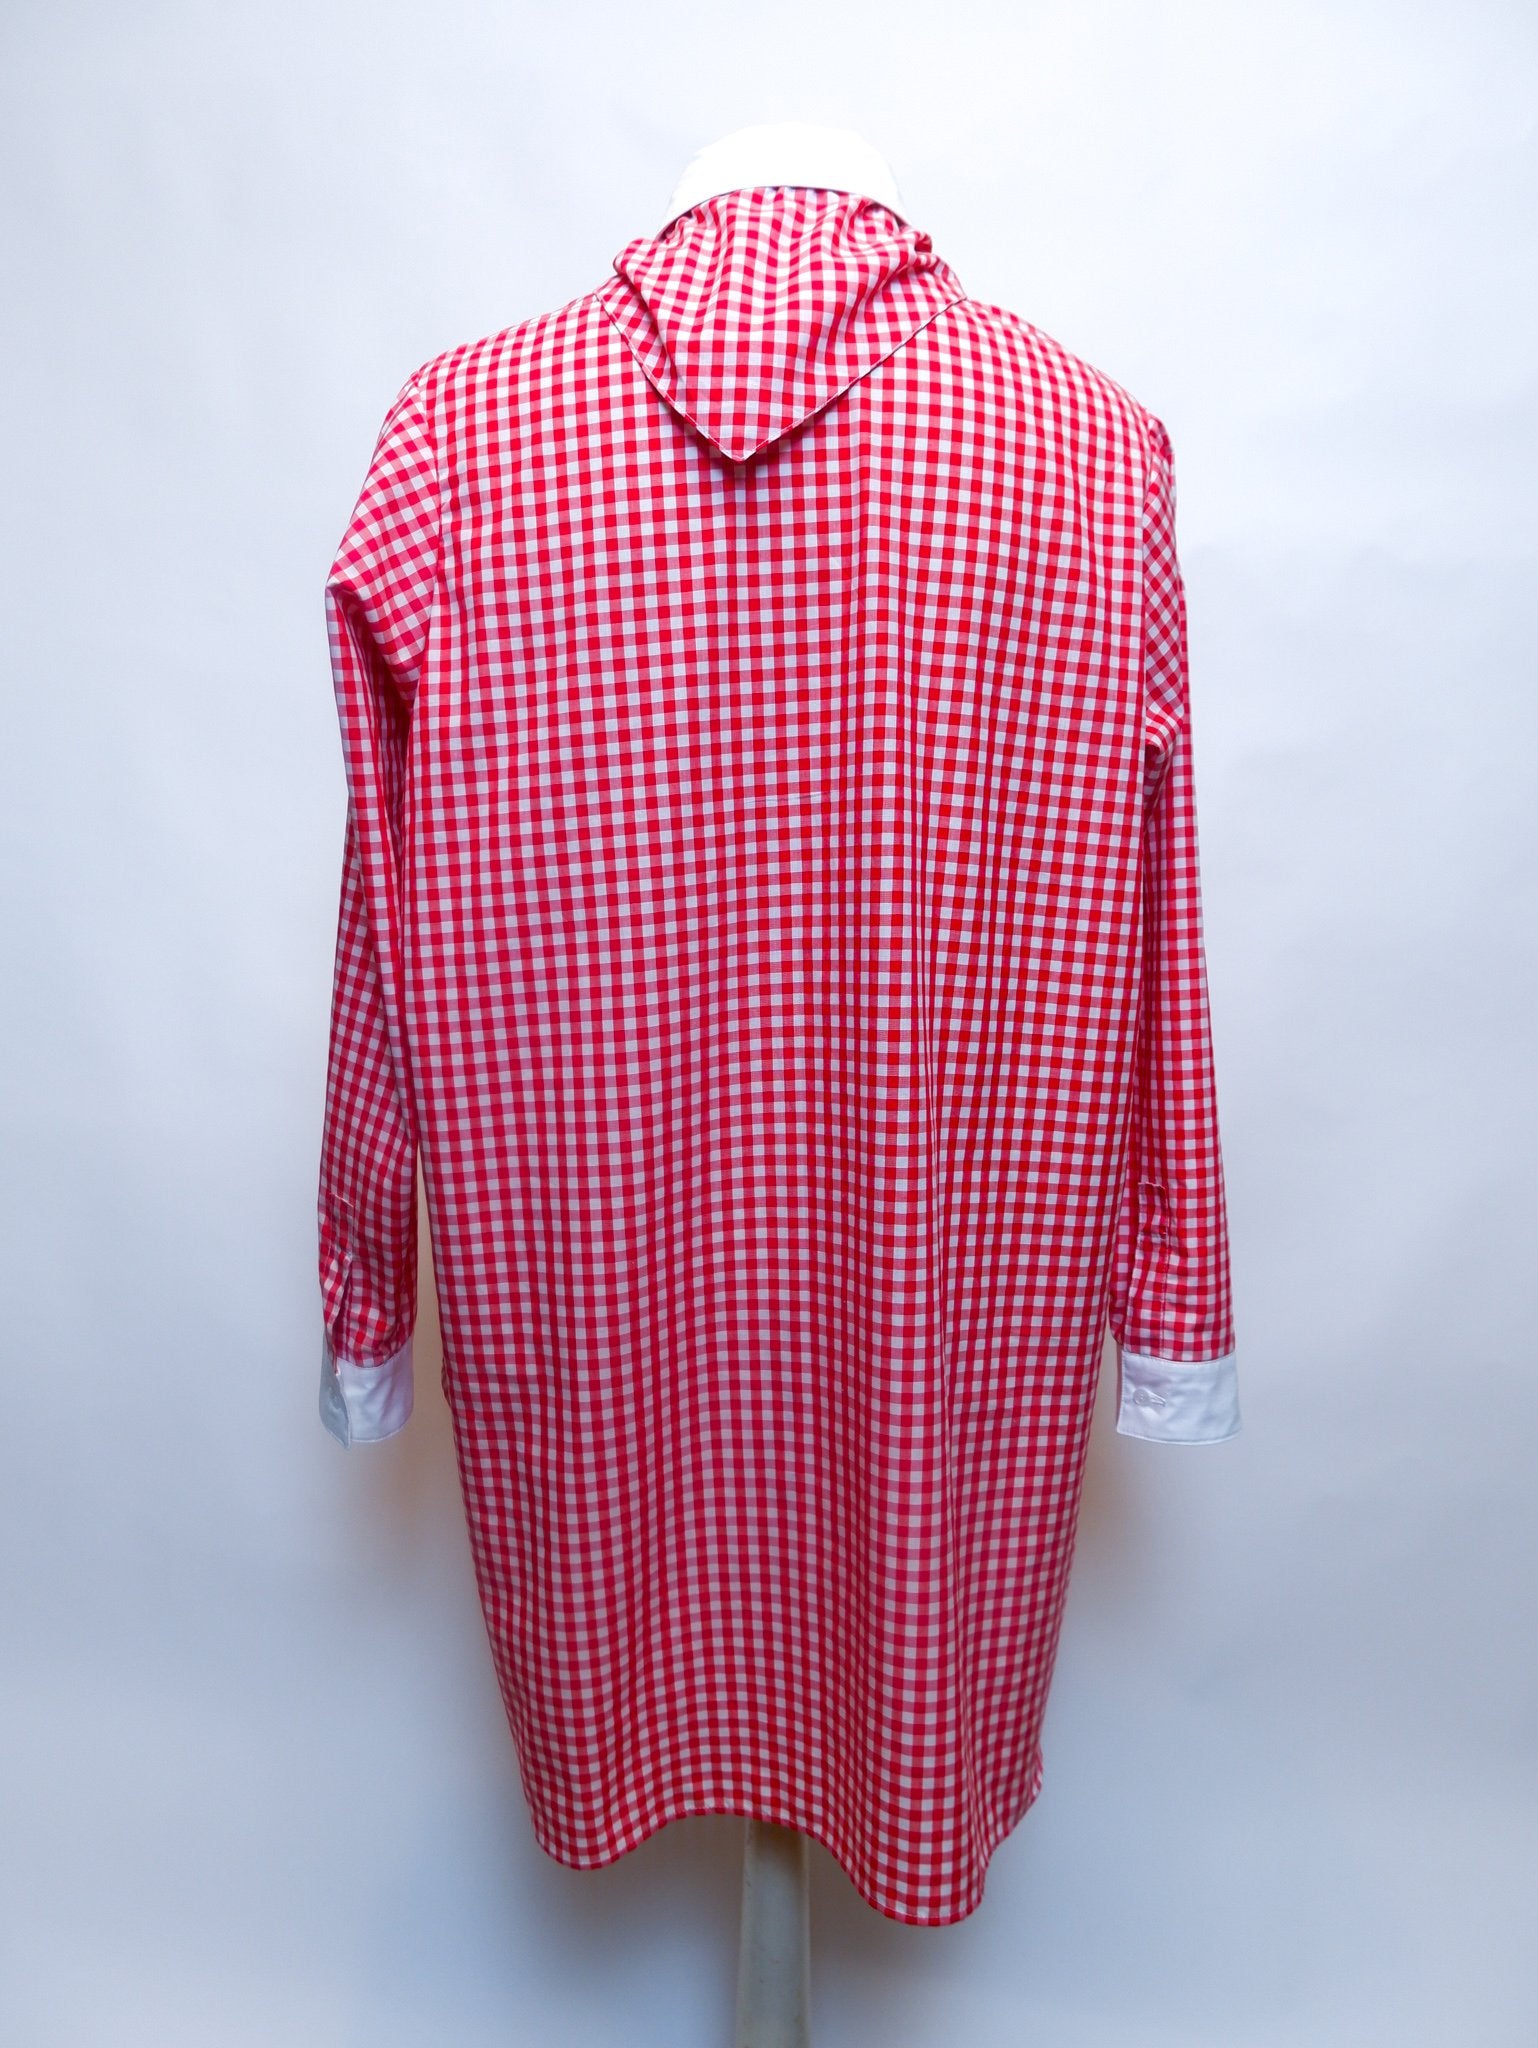 DRESS SHIRT IN RED CHECK WITH WHITE CONTRAST - MADE TO ORDER-menswear-A Child Of The Jago